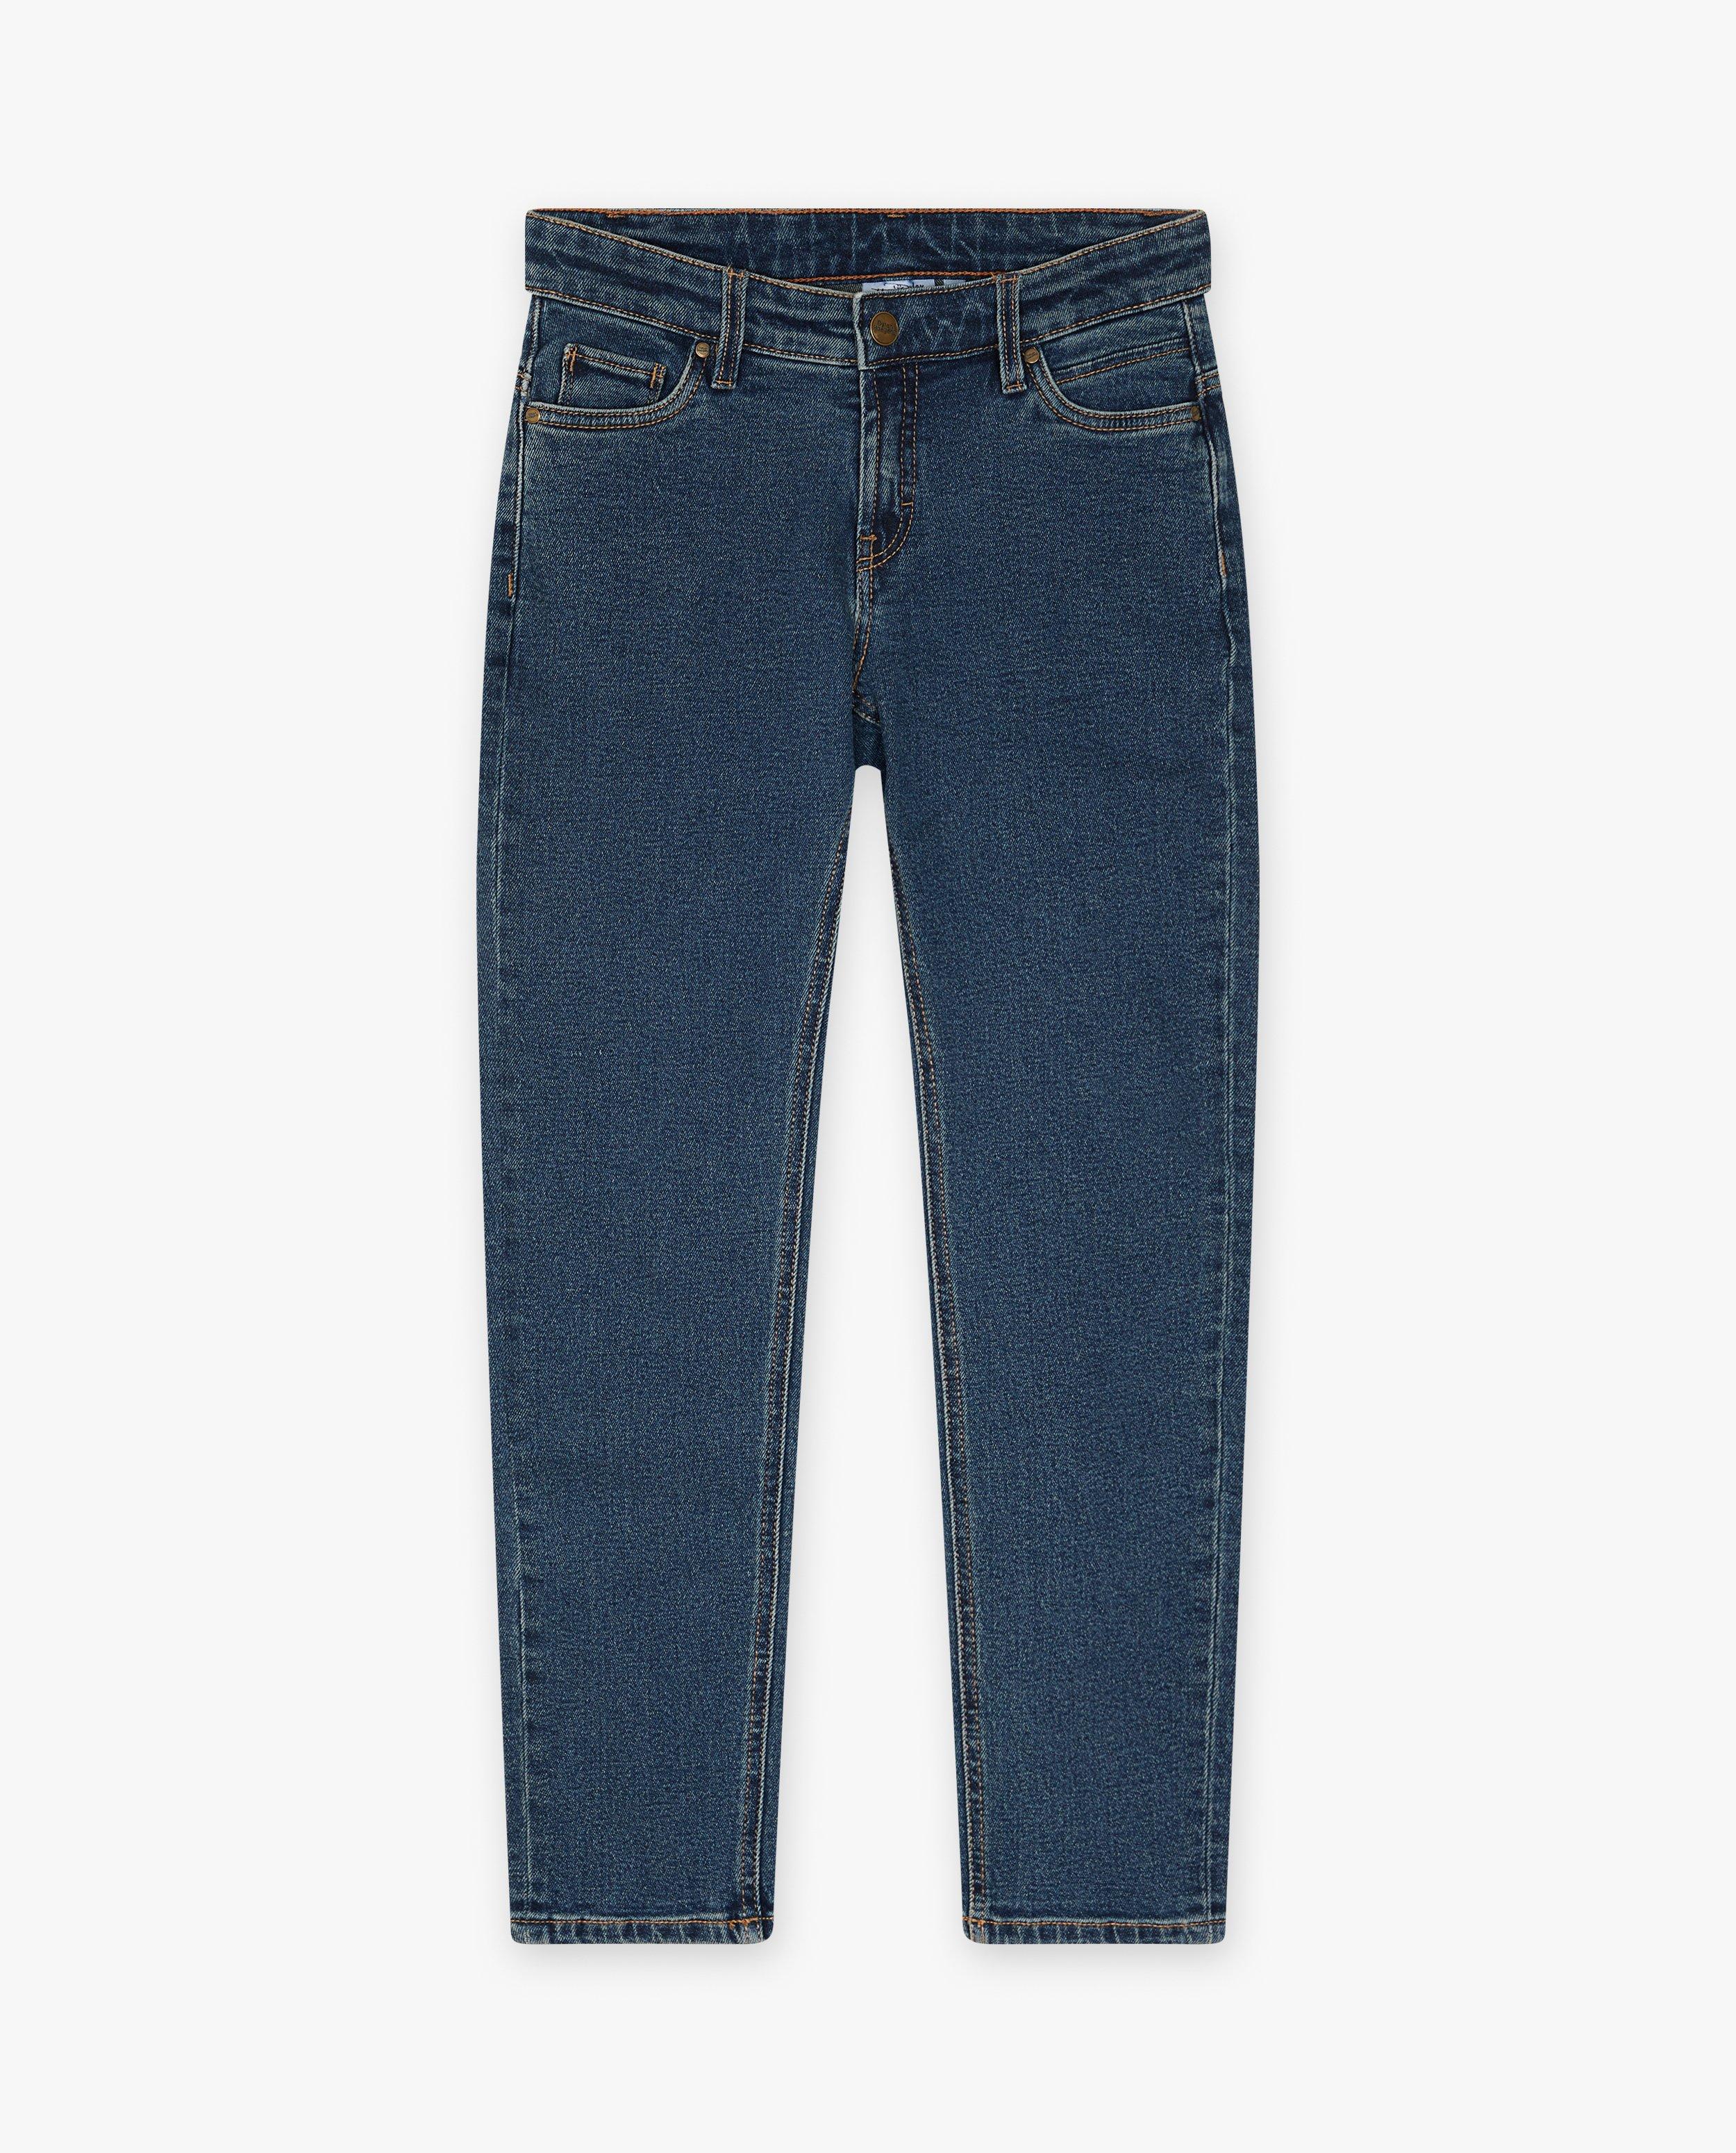 Jeans - Donkerblauwe jeans, straight fit